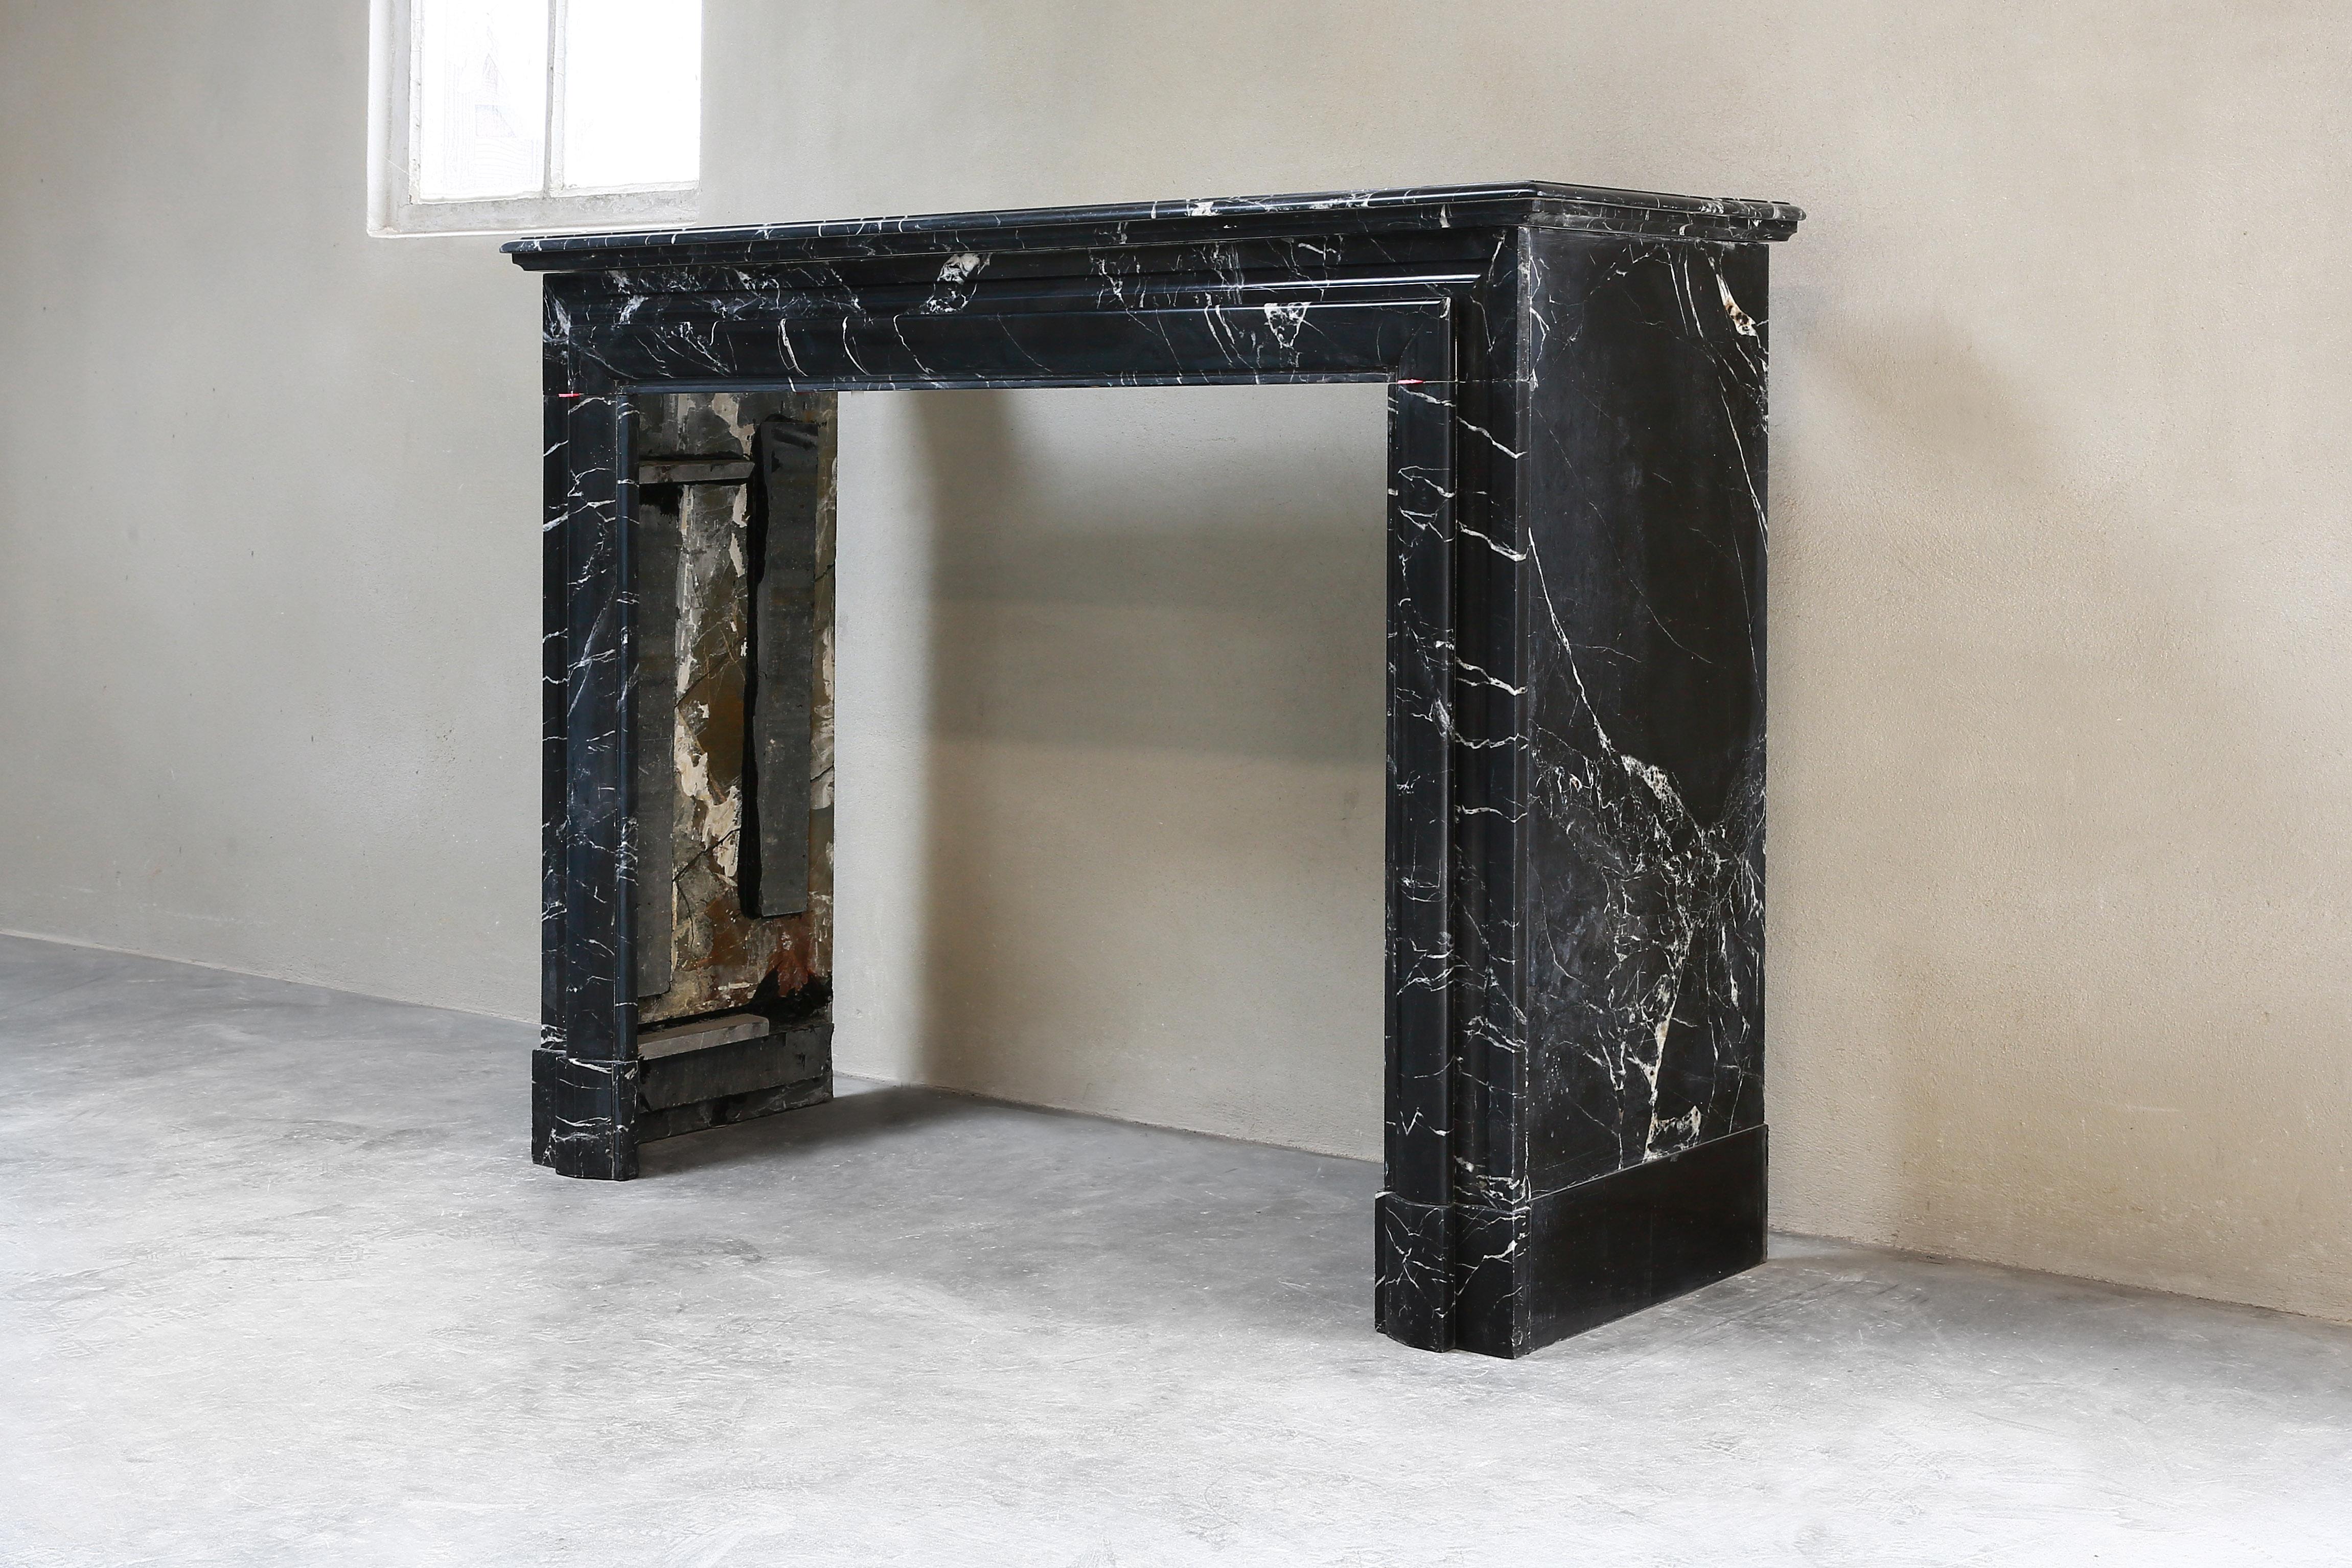 A very beautiful antique fireplace of the marble type Nero Marquina, a black marble with light veins. This fireplace dates from the 19th century and is in the style of Boudain. The fireplace is sleek with beautiful lines and can be used for many